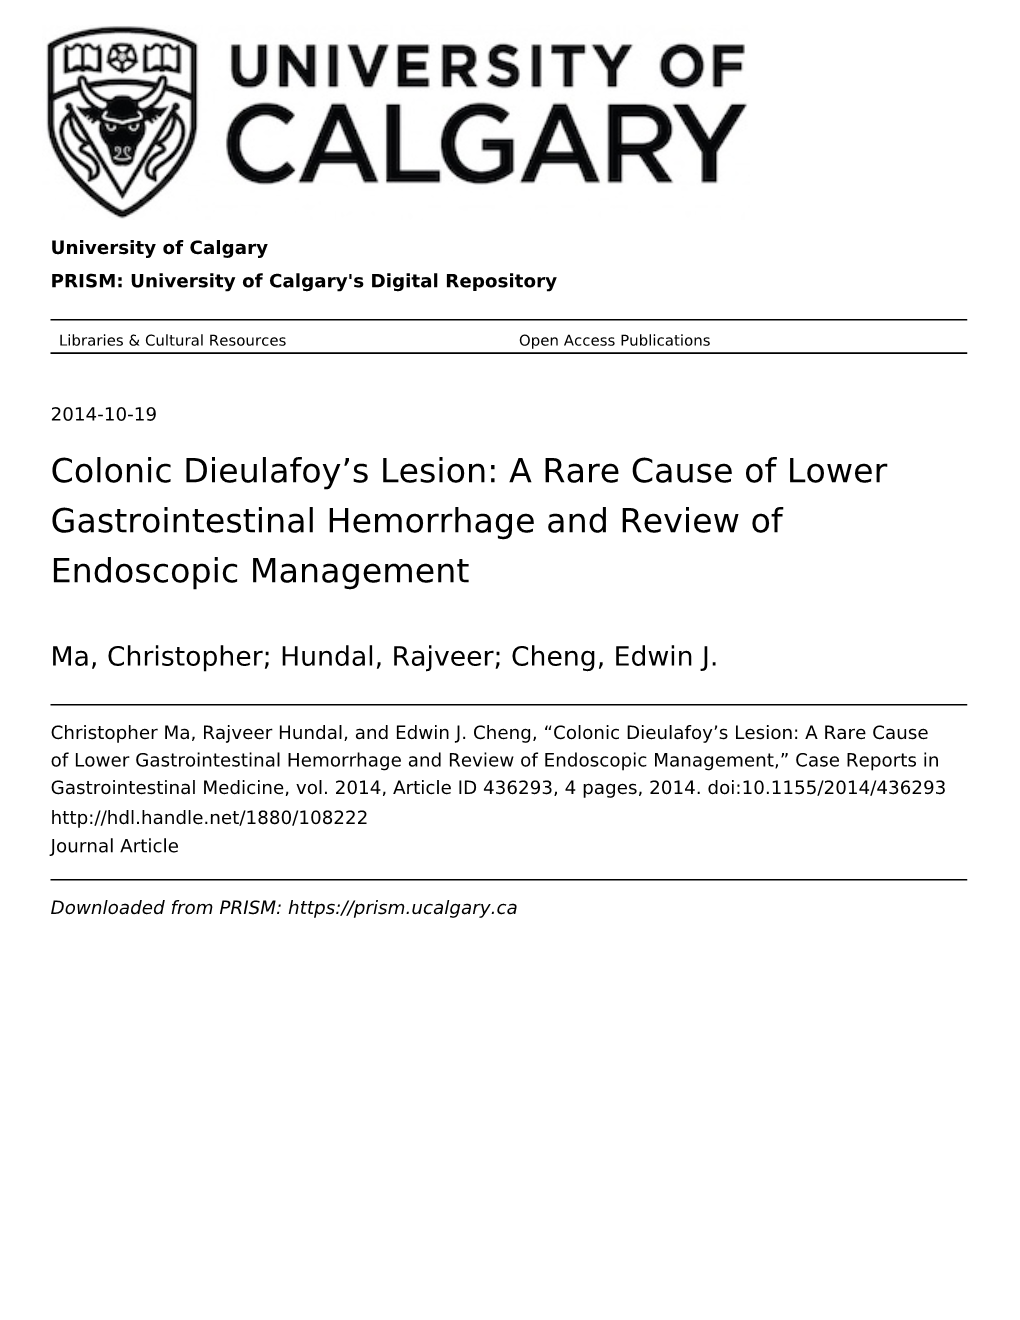 Colonic Dieulafoy's Lesion: a Rare Cause of Lower Gastrointestinal